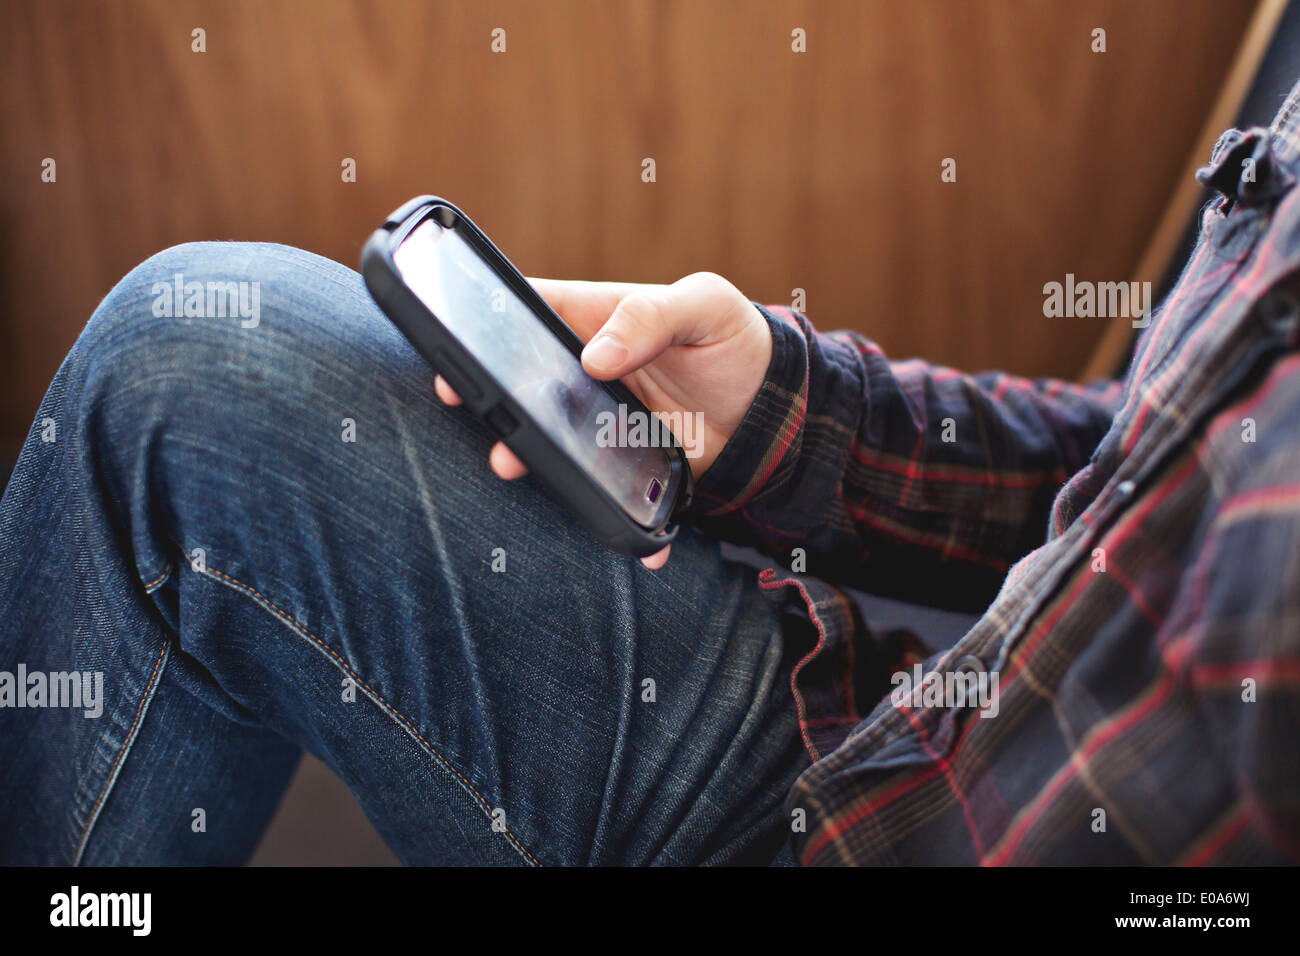 Mid section of man using smartphone Banque D'Images